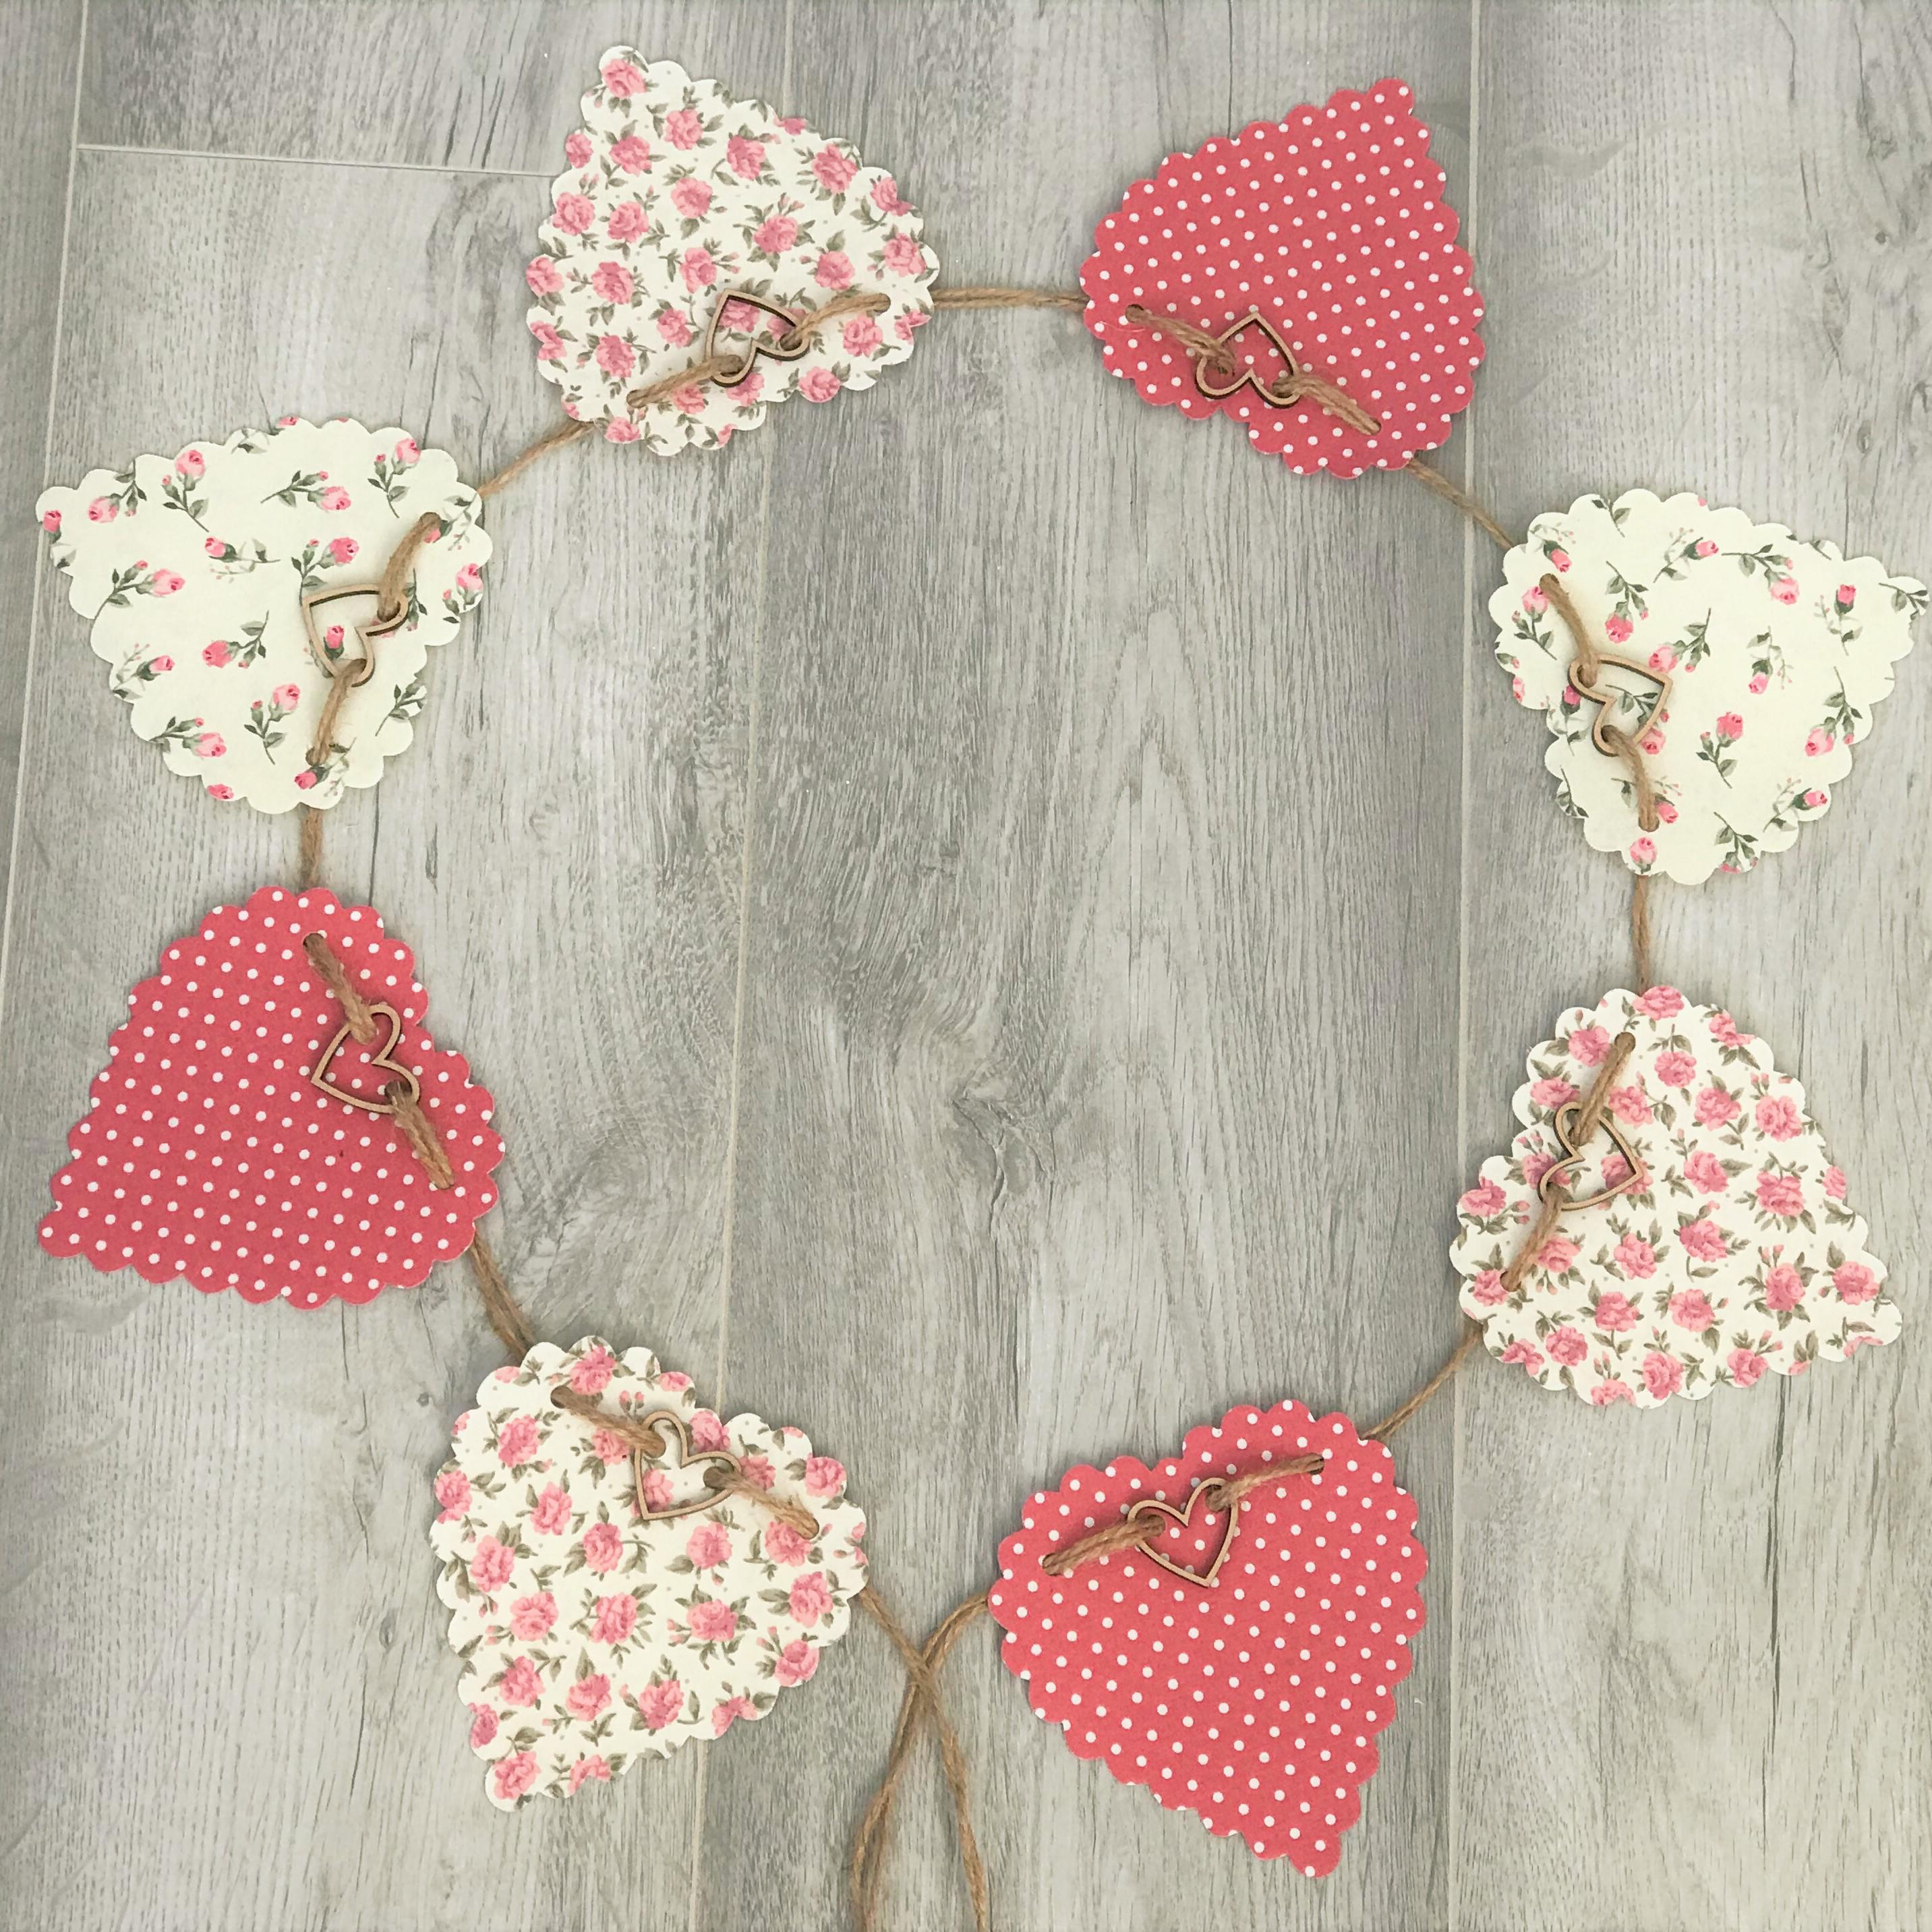 Fabric Bunting,Rose Pink,Rigid Hearts,Polka Dots,Ditsy Florals,100% Cotton,2.5 Metres Long,Home Decor,Vintage Decor